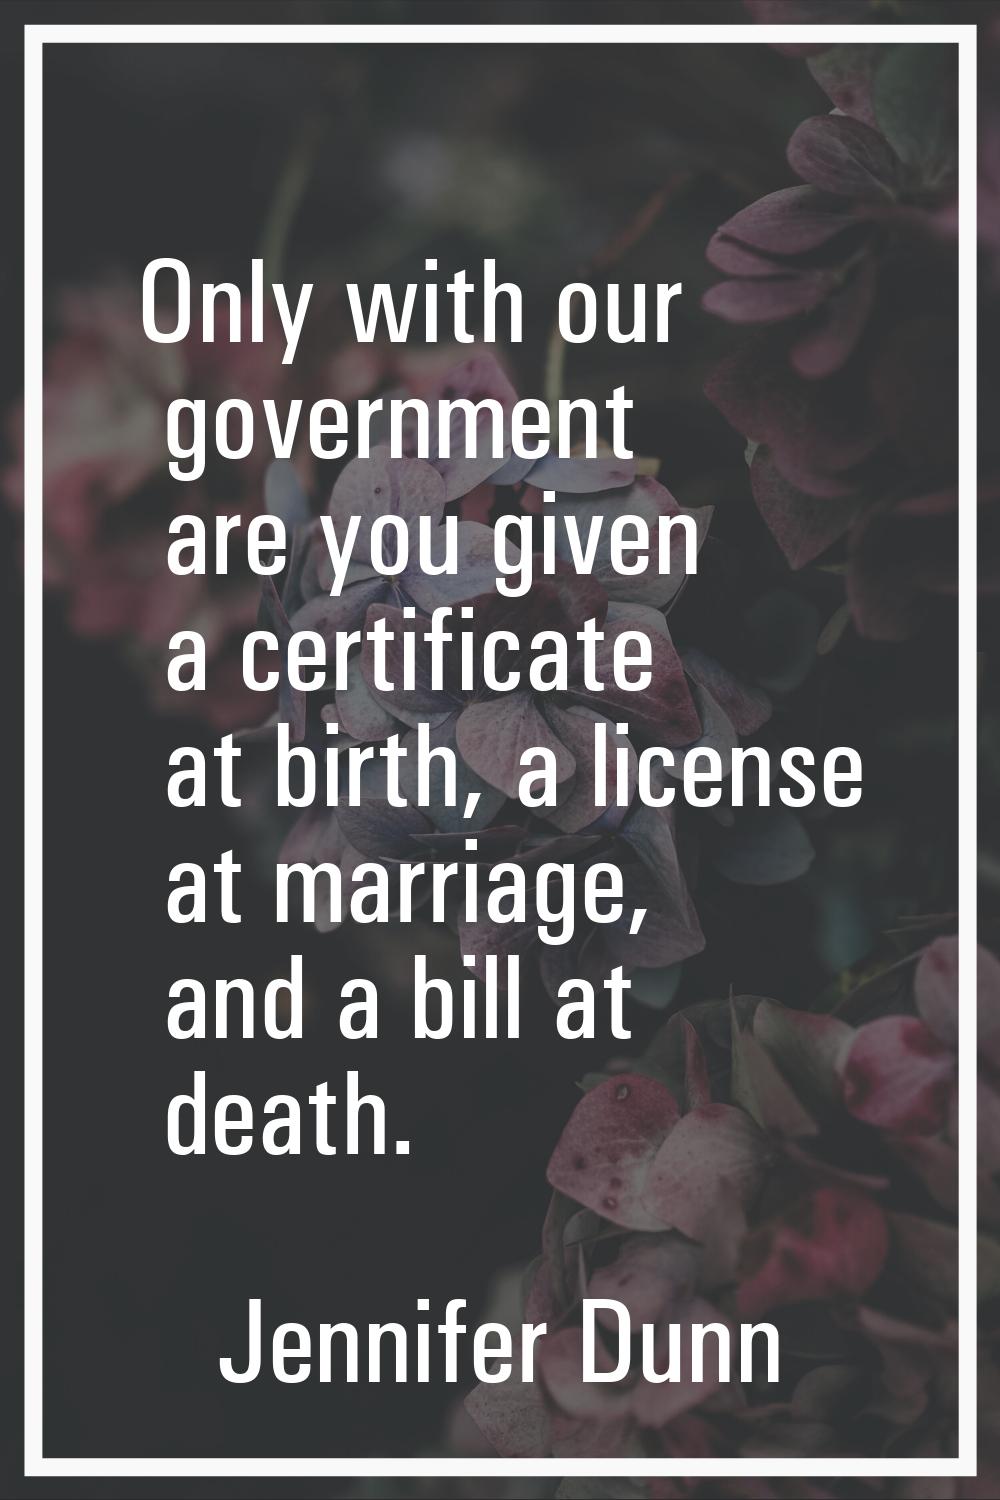 Only with our government are you given a certificate at birth, a license at marriage, and a bill at